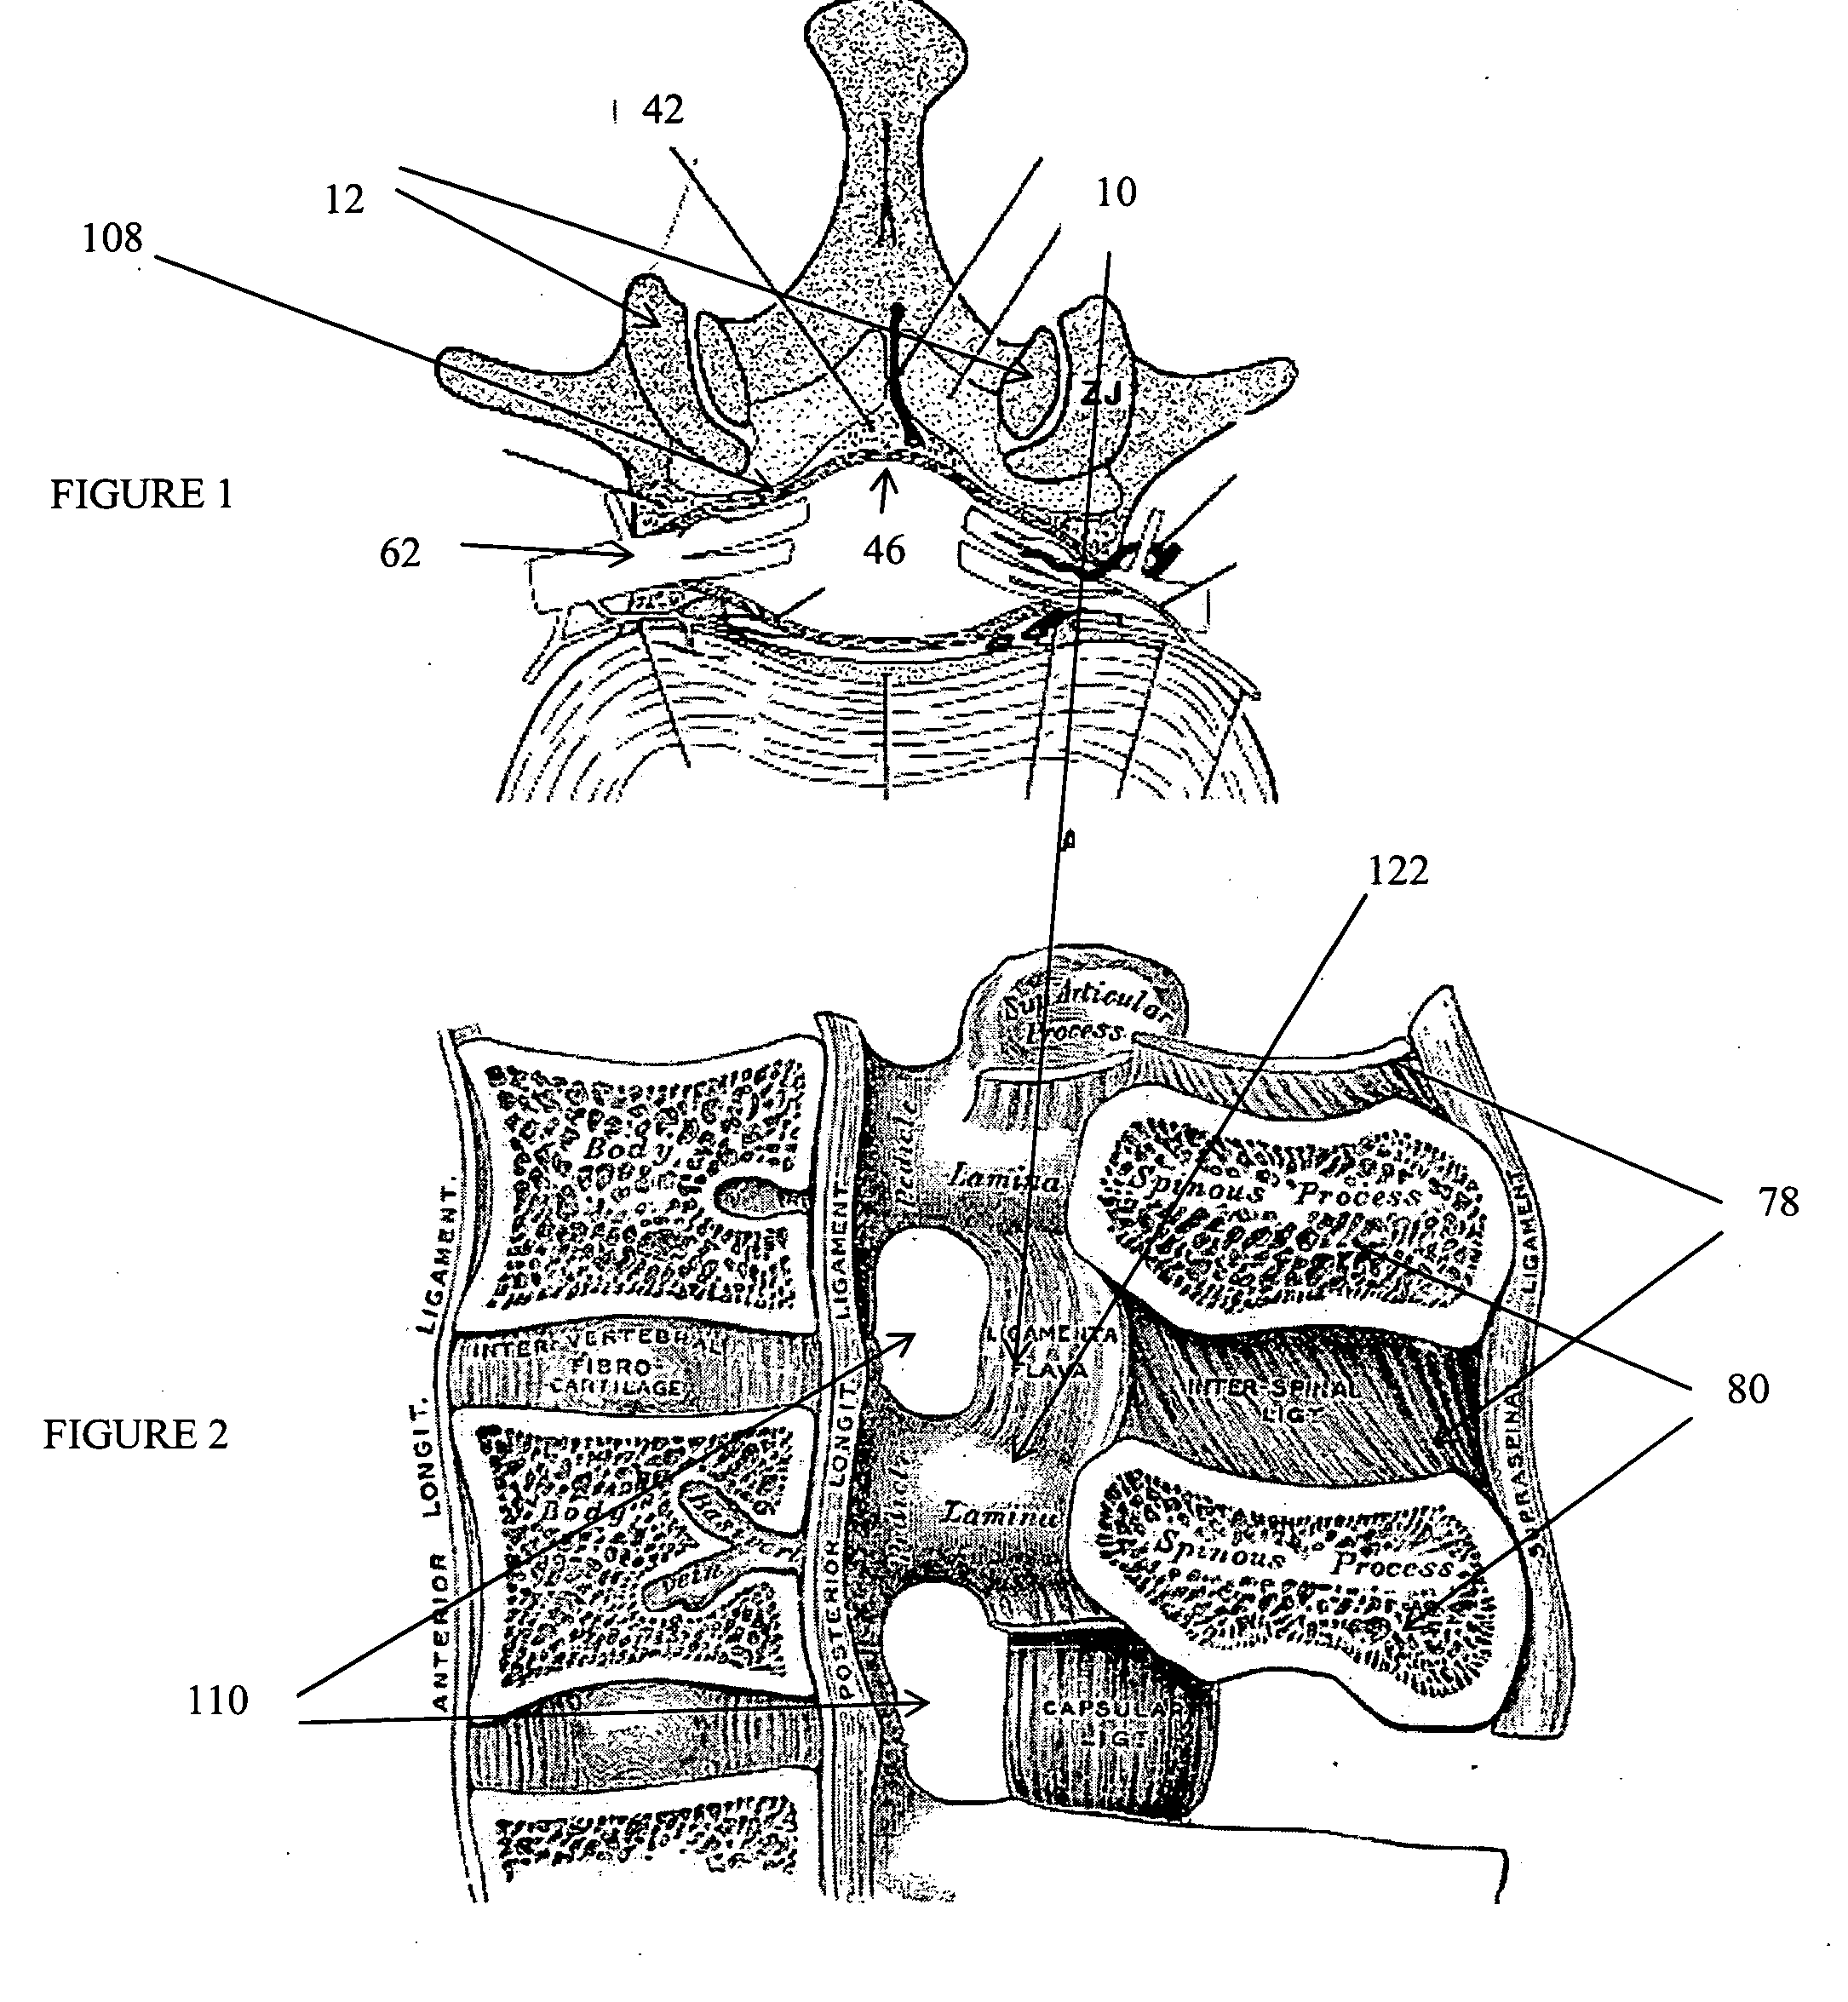 Devices and methods for tissue access